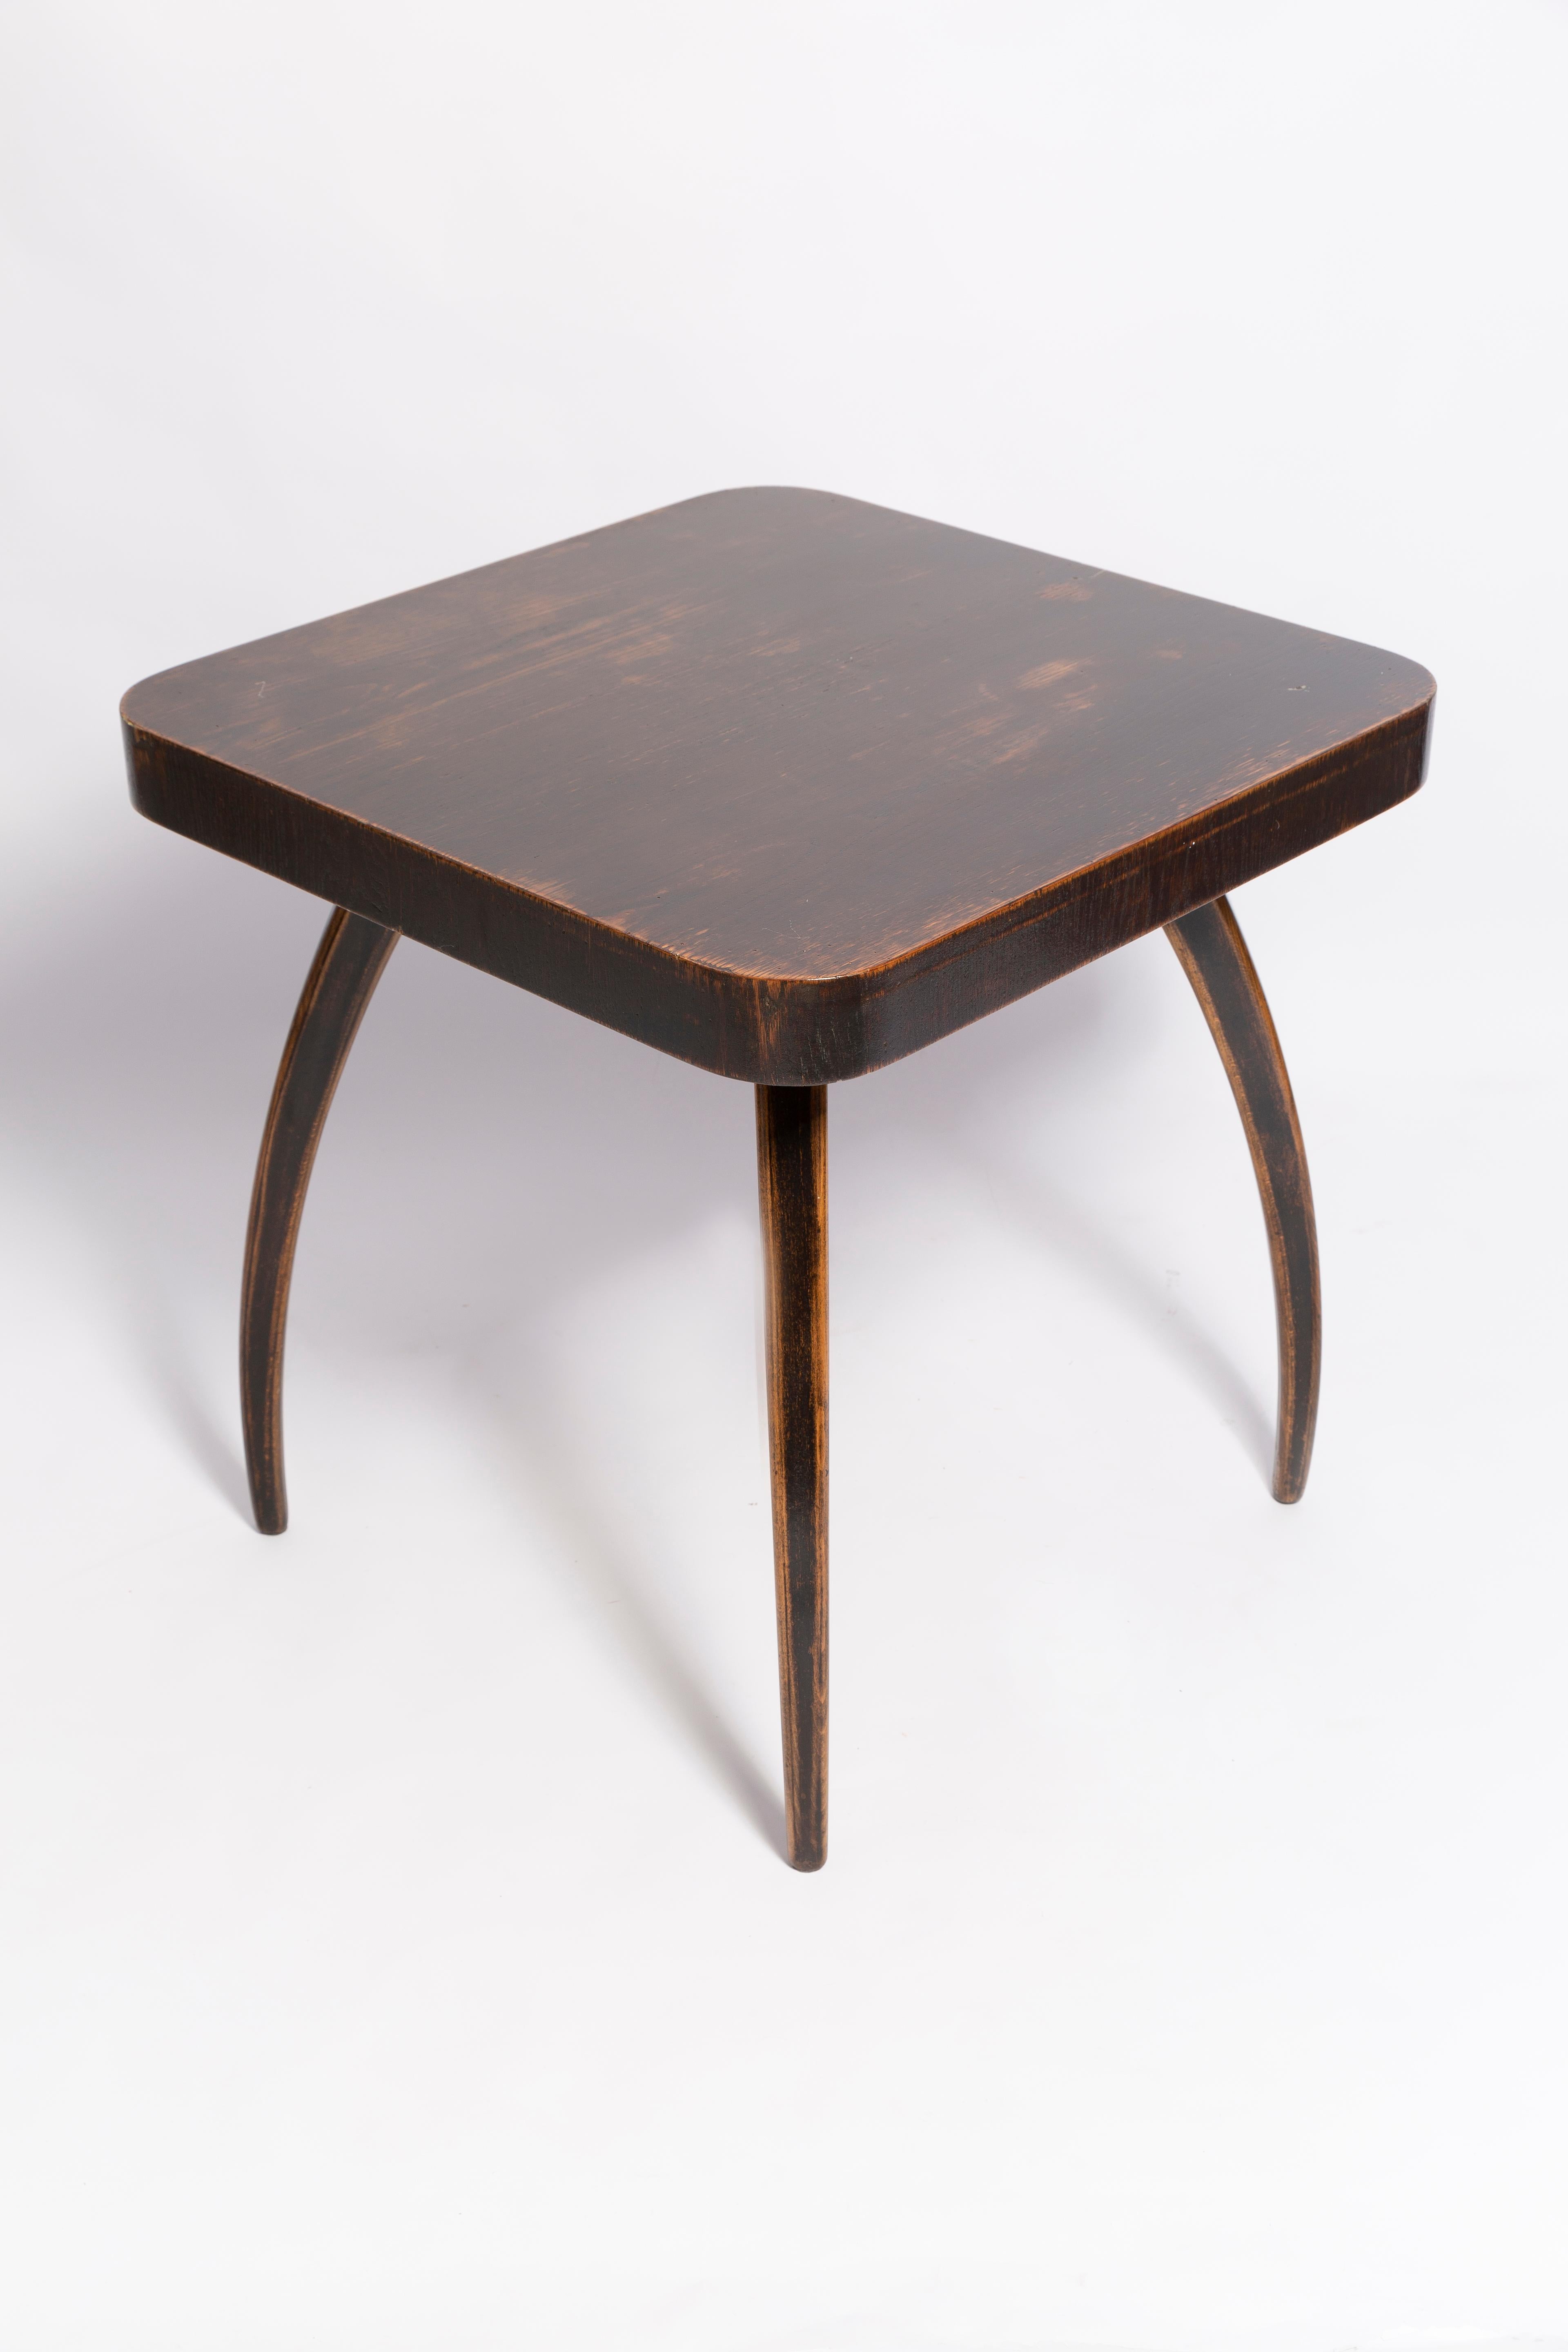 Table type H-259, or the popular “Spider”, was designed by Jindrich Halabala (master of Czechoslovak design) for UP Zavoda in Brno at the end of the 1930s. The table is an icon of Czechoslovak art deco style, but tall and slim legs made of beech